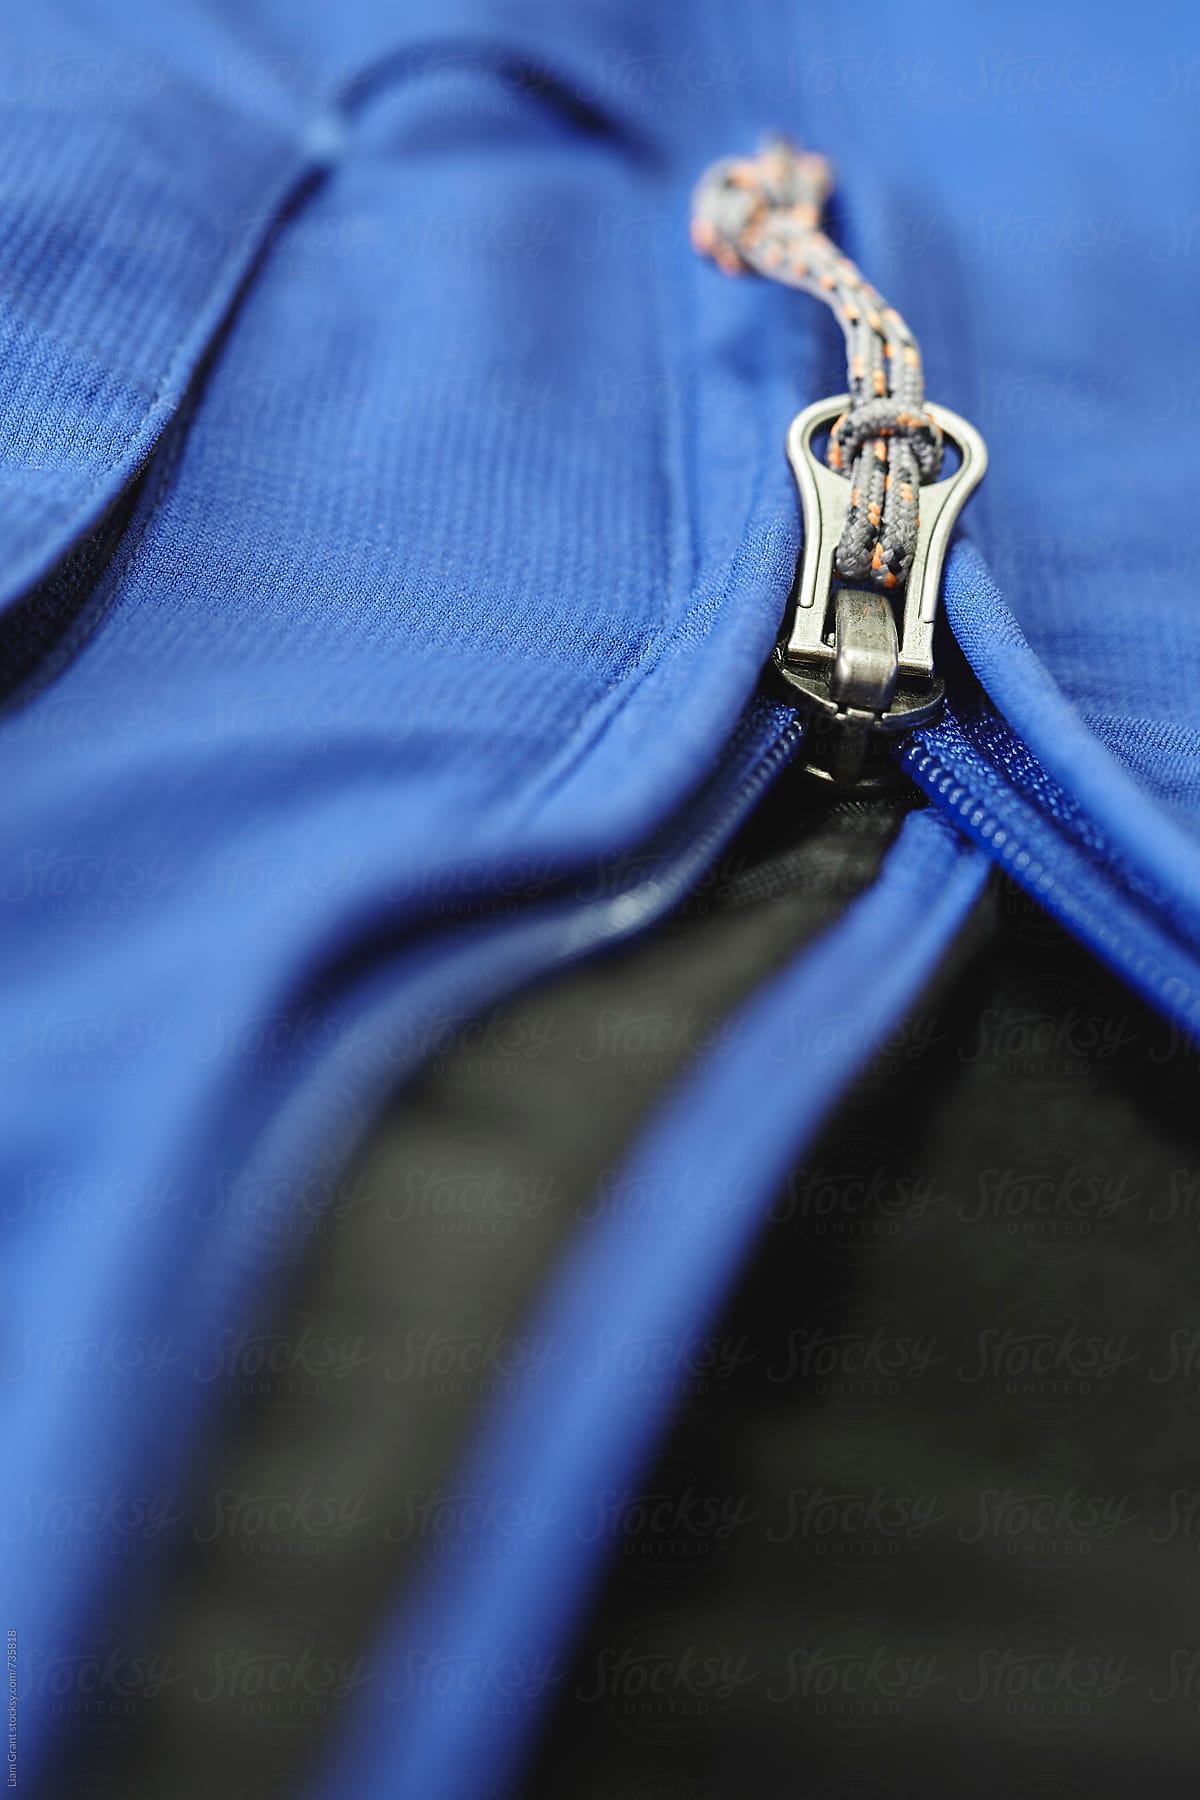 Windproof zip and fabric of a softshell mountaineering jacket.